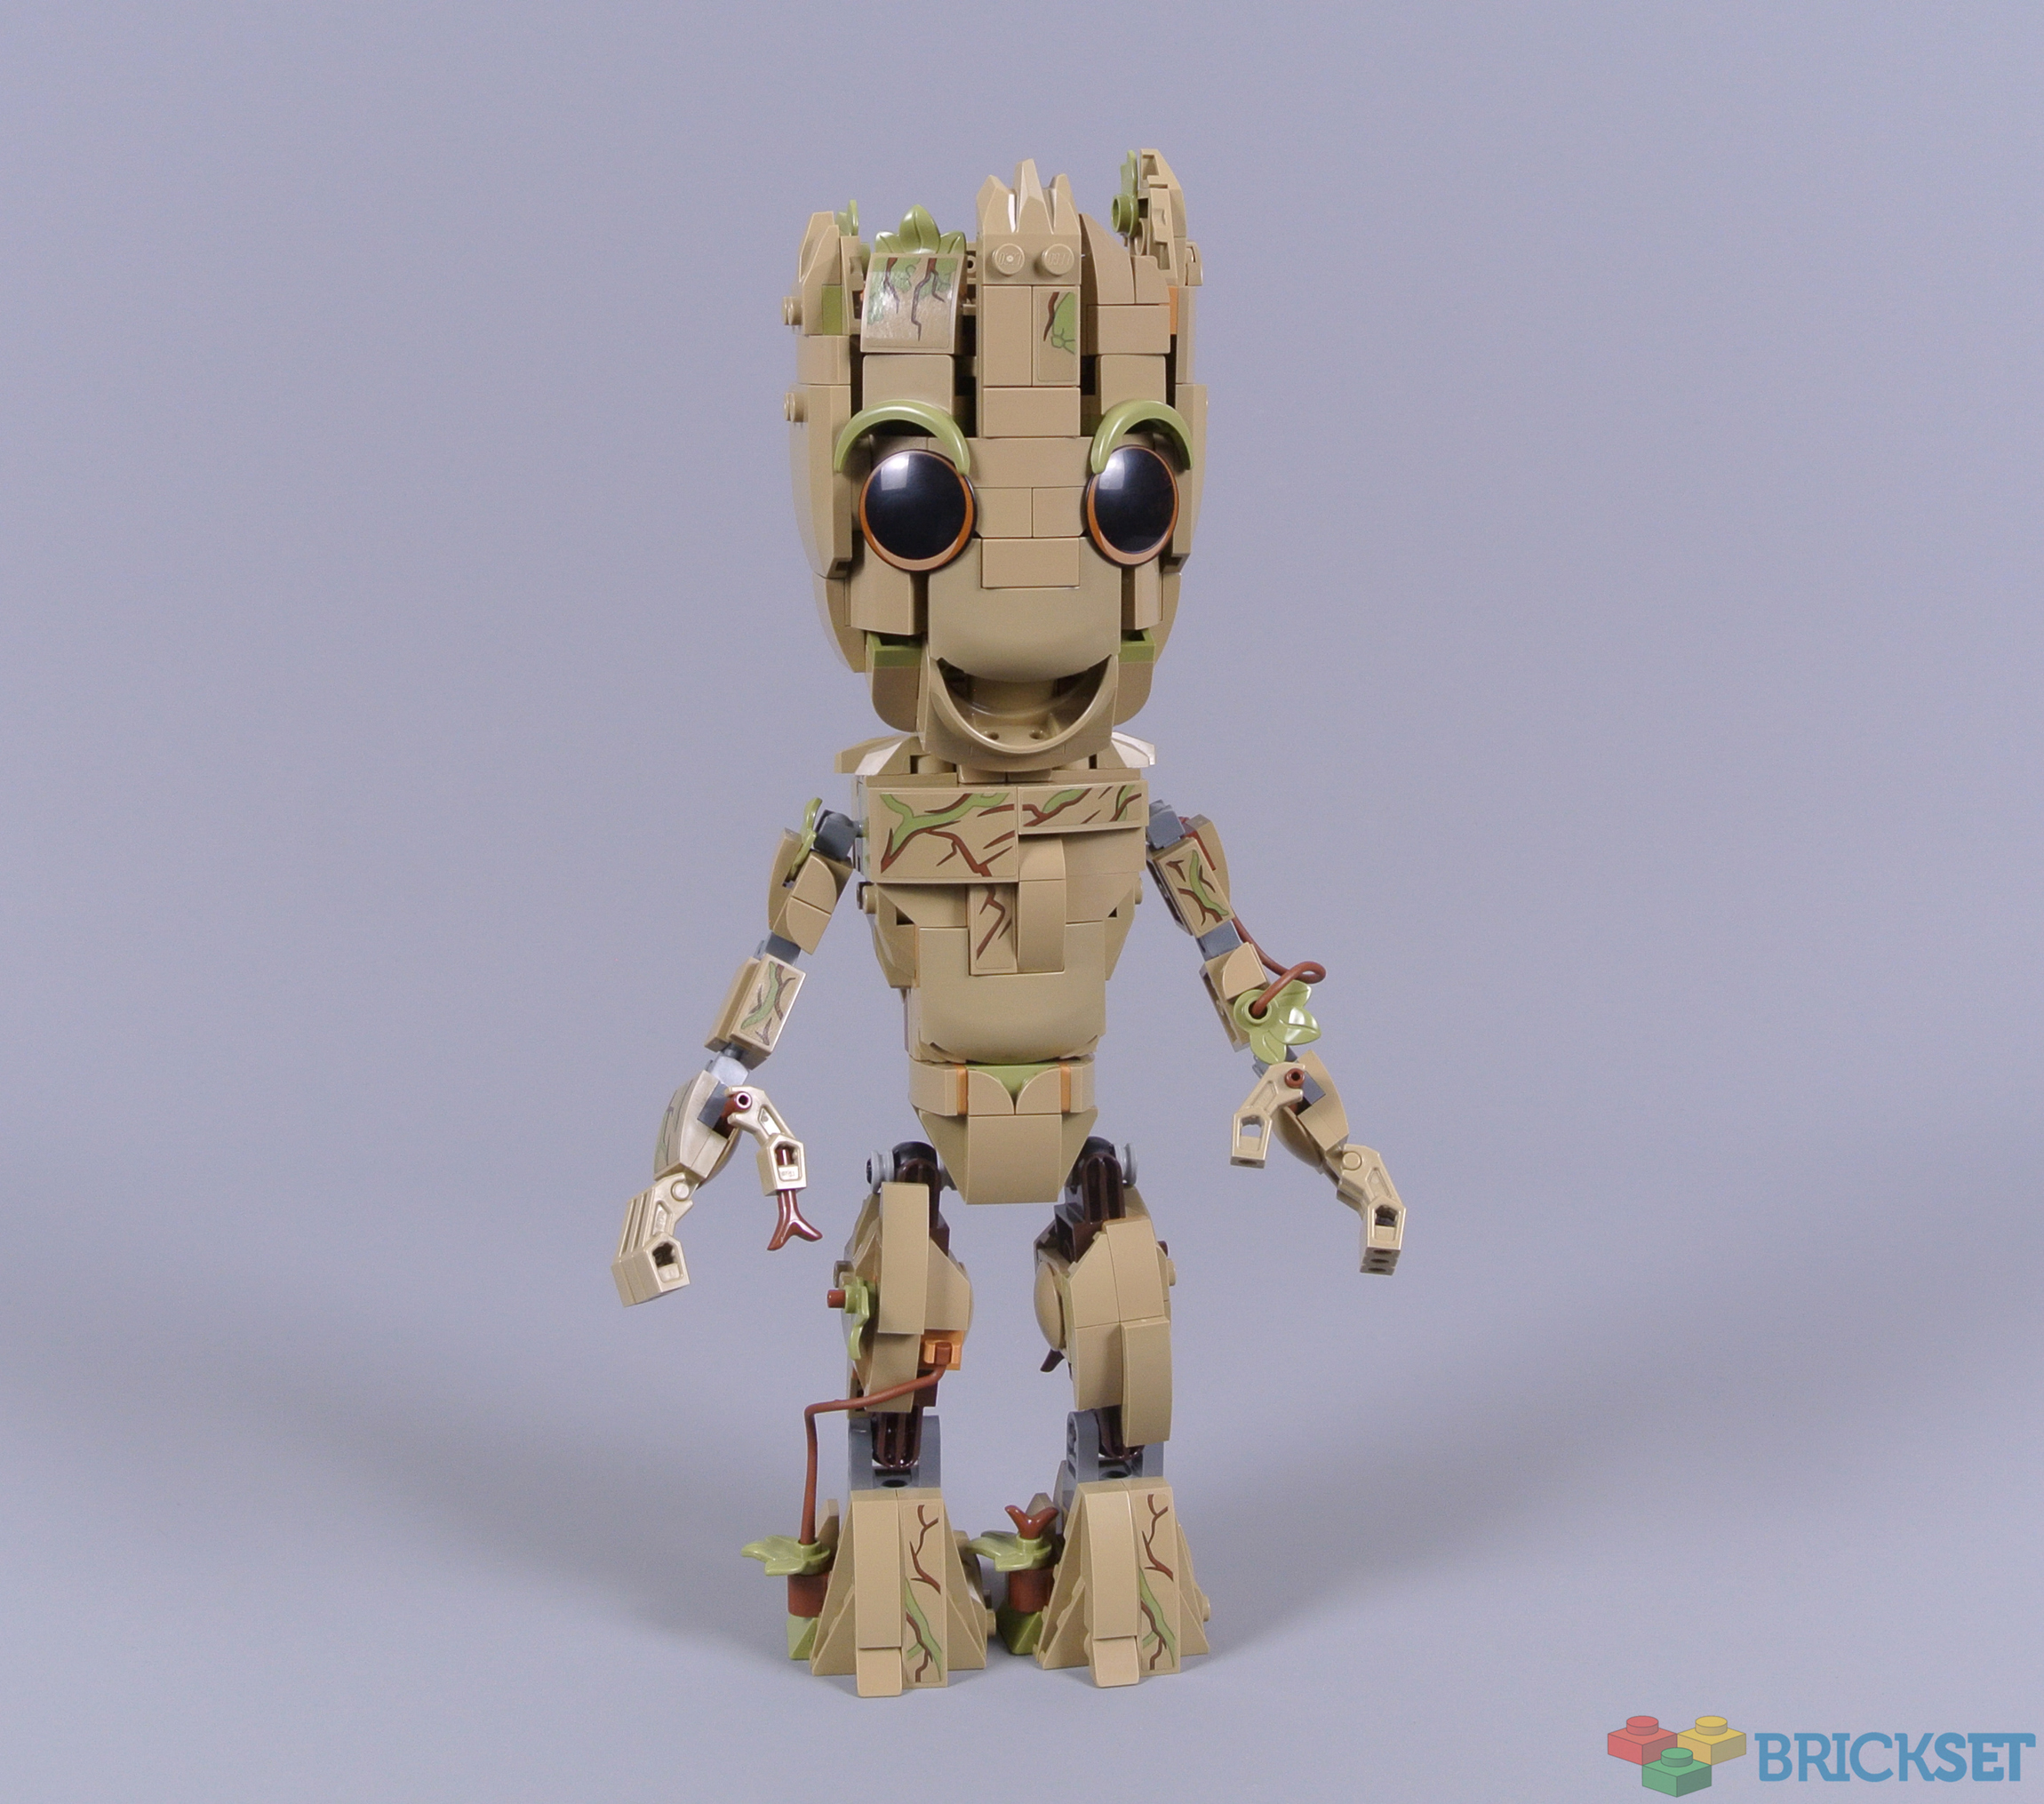 Review: 76217-1 - I Am Groot﻿